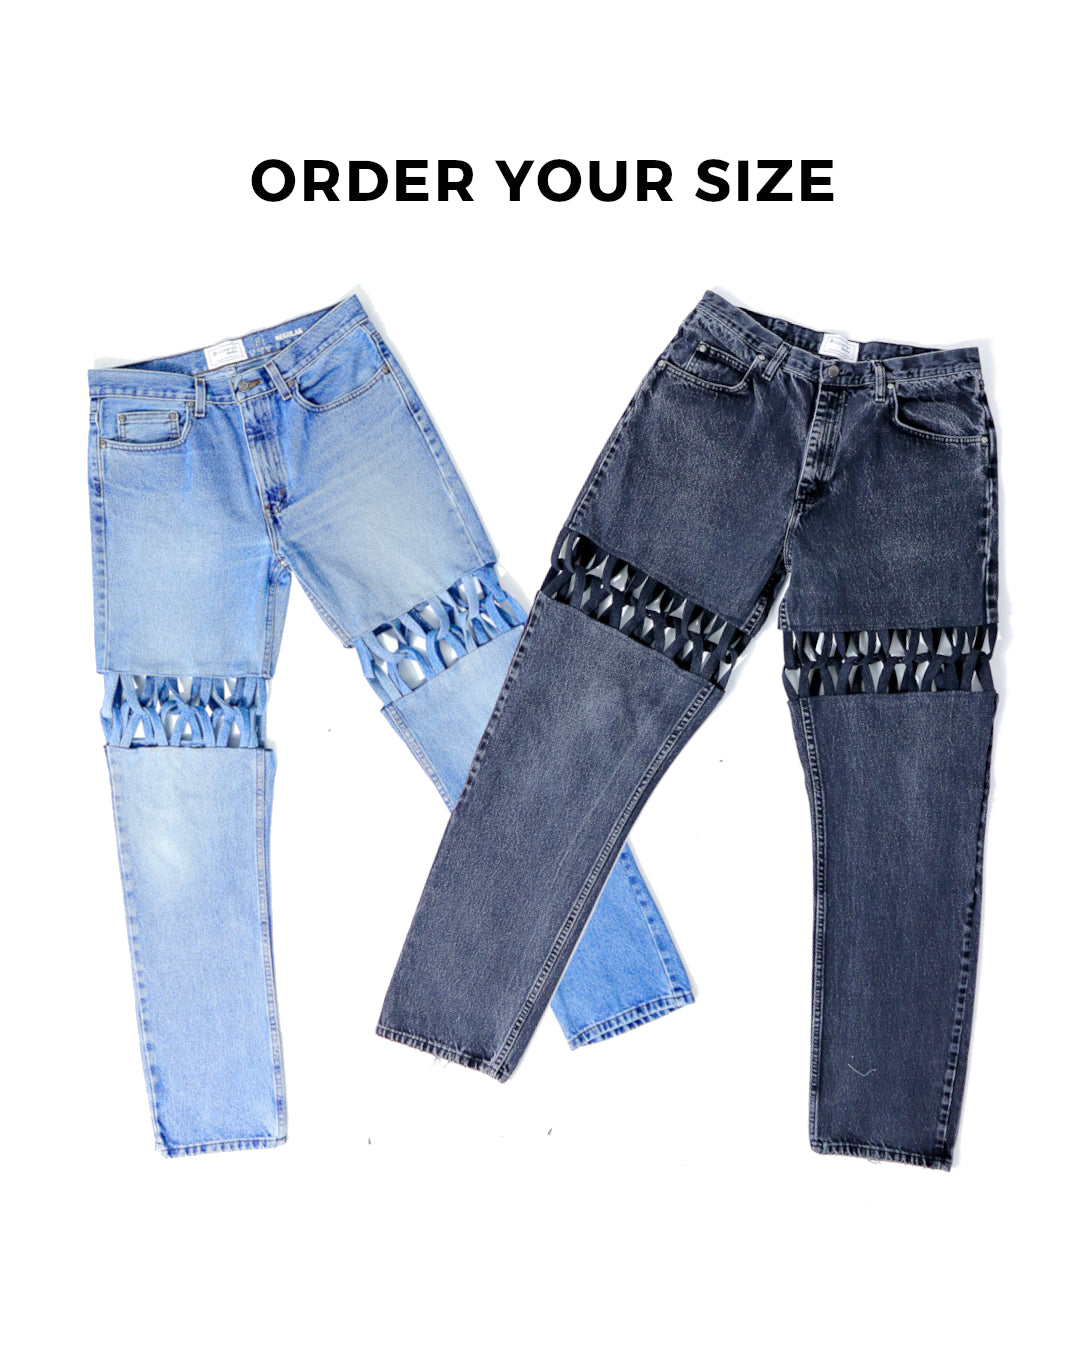 Criss Cross Jeans (Order Your Size)